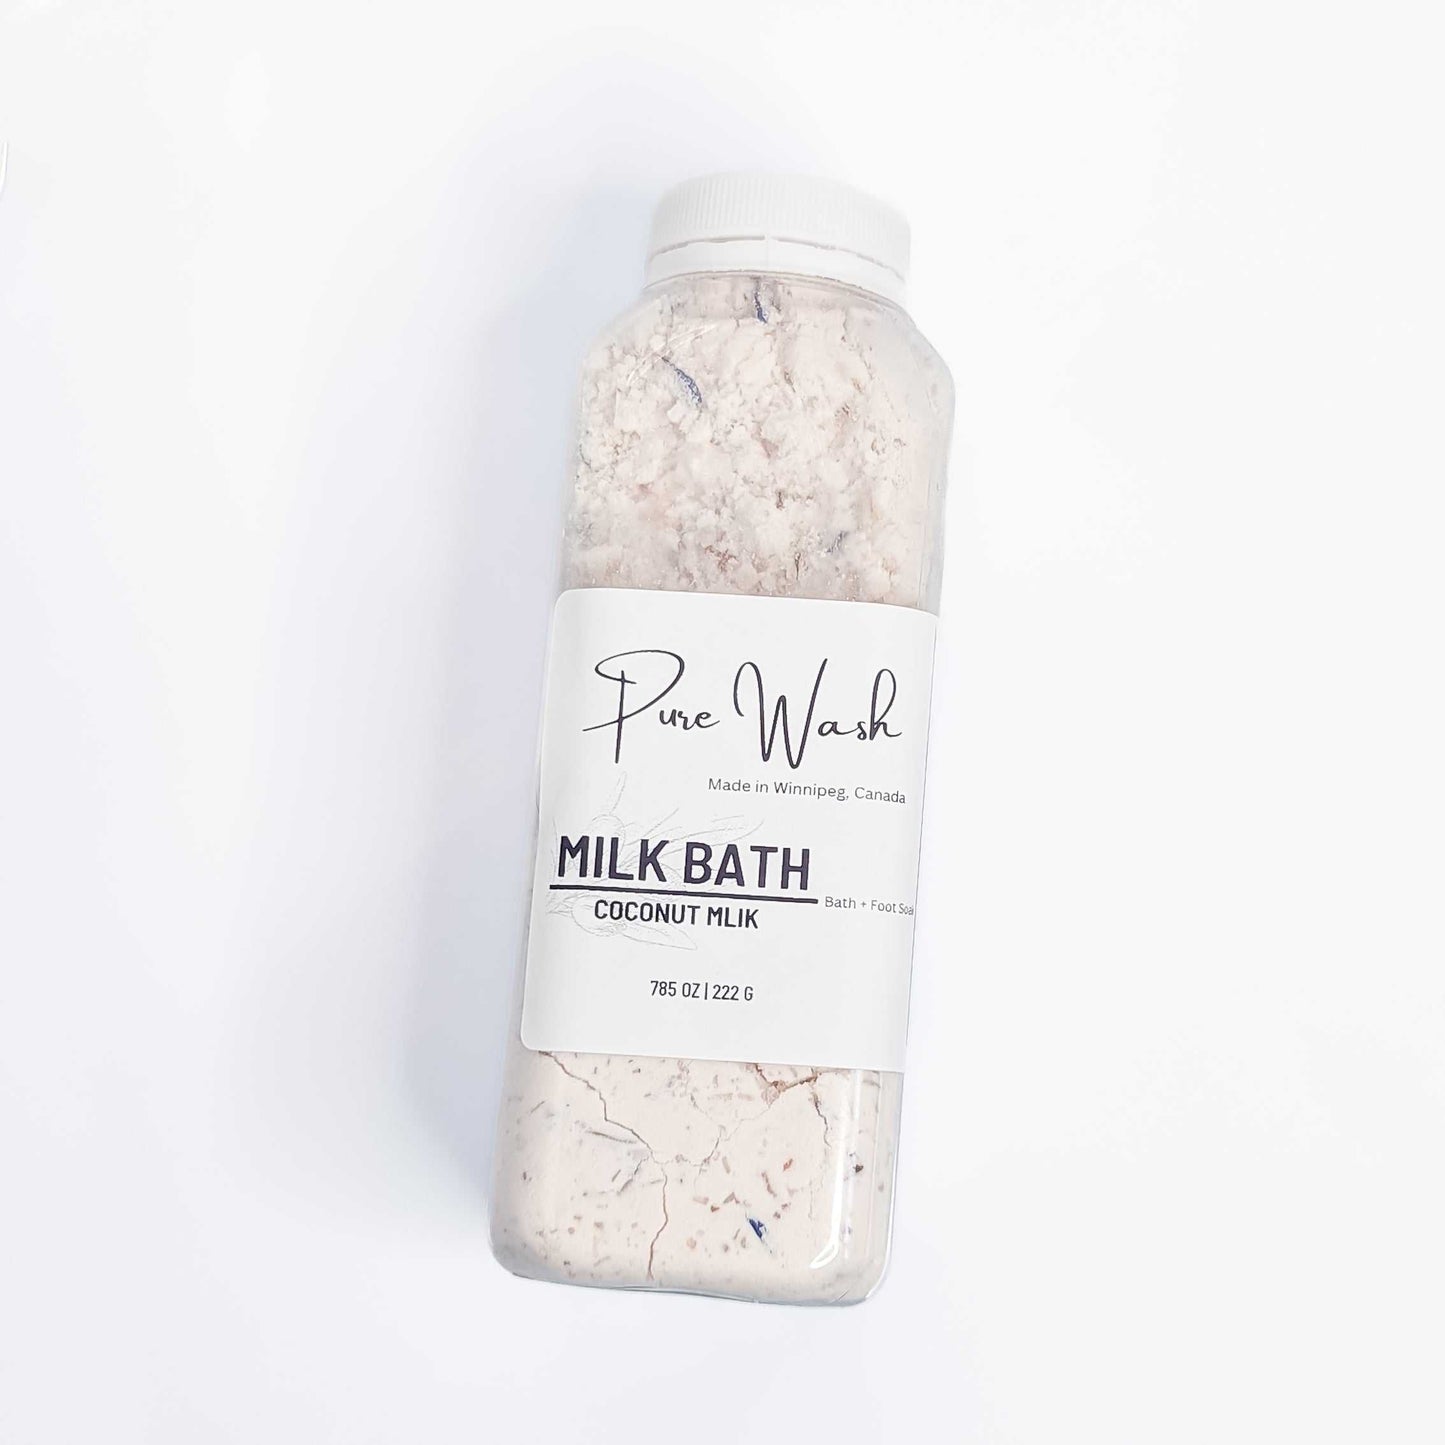 CG Pure Wash Milk Bath Soak bottle filled with coconut milk infused bath powder, presented on a pristine white background, highlighting the natural, handmade quality made in Winnipeg, Canada